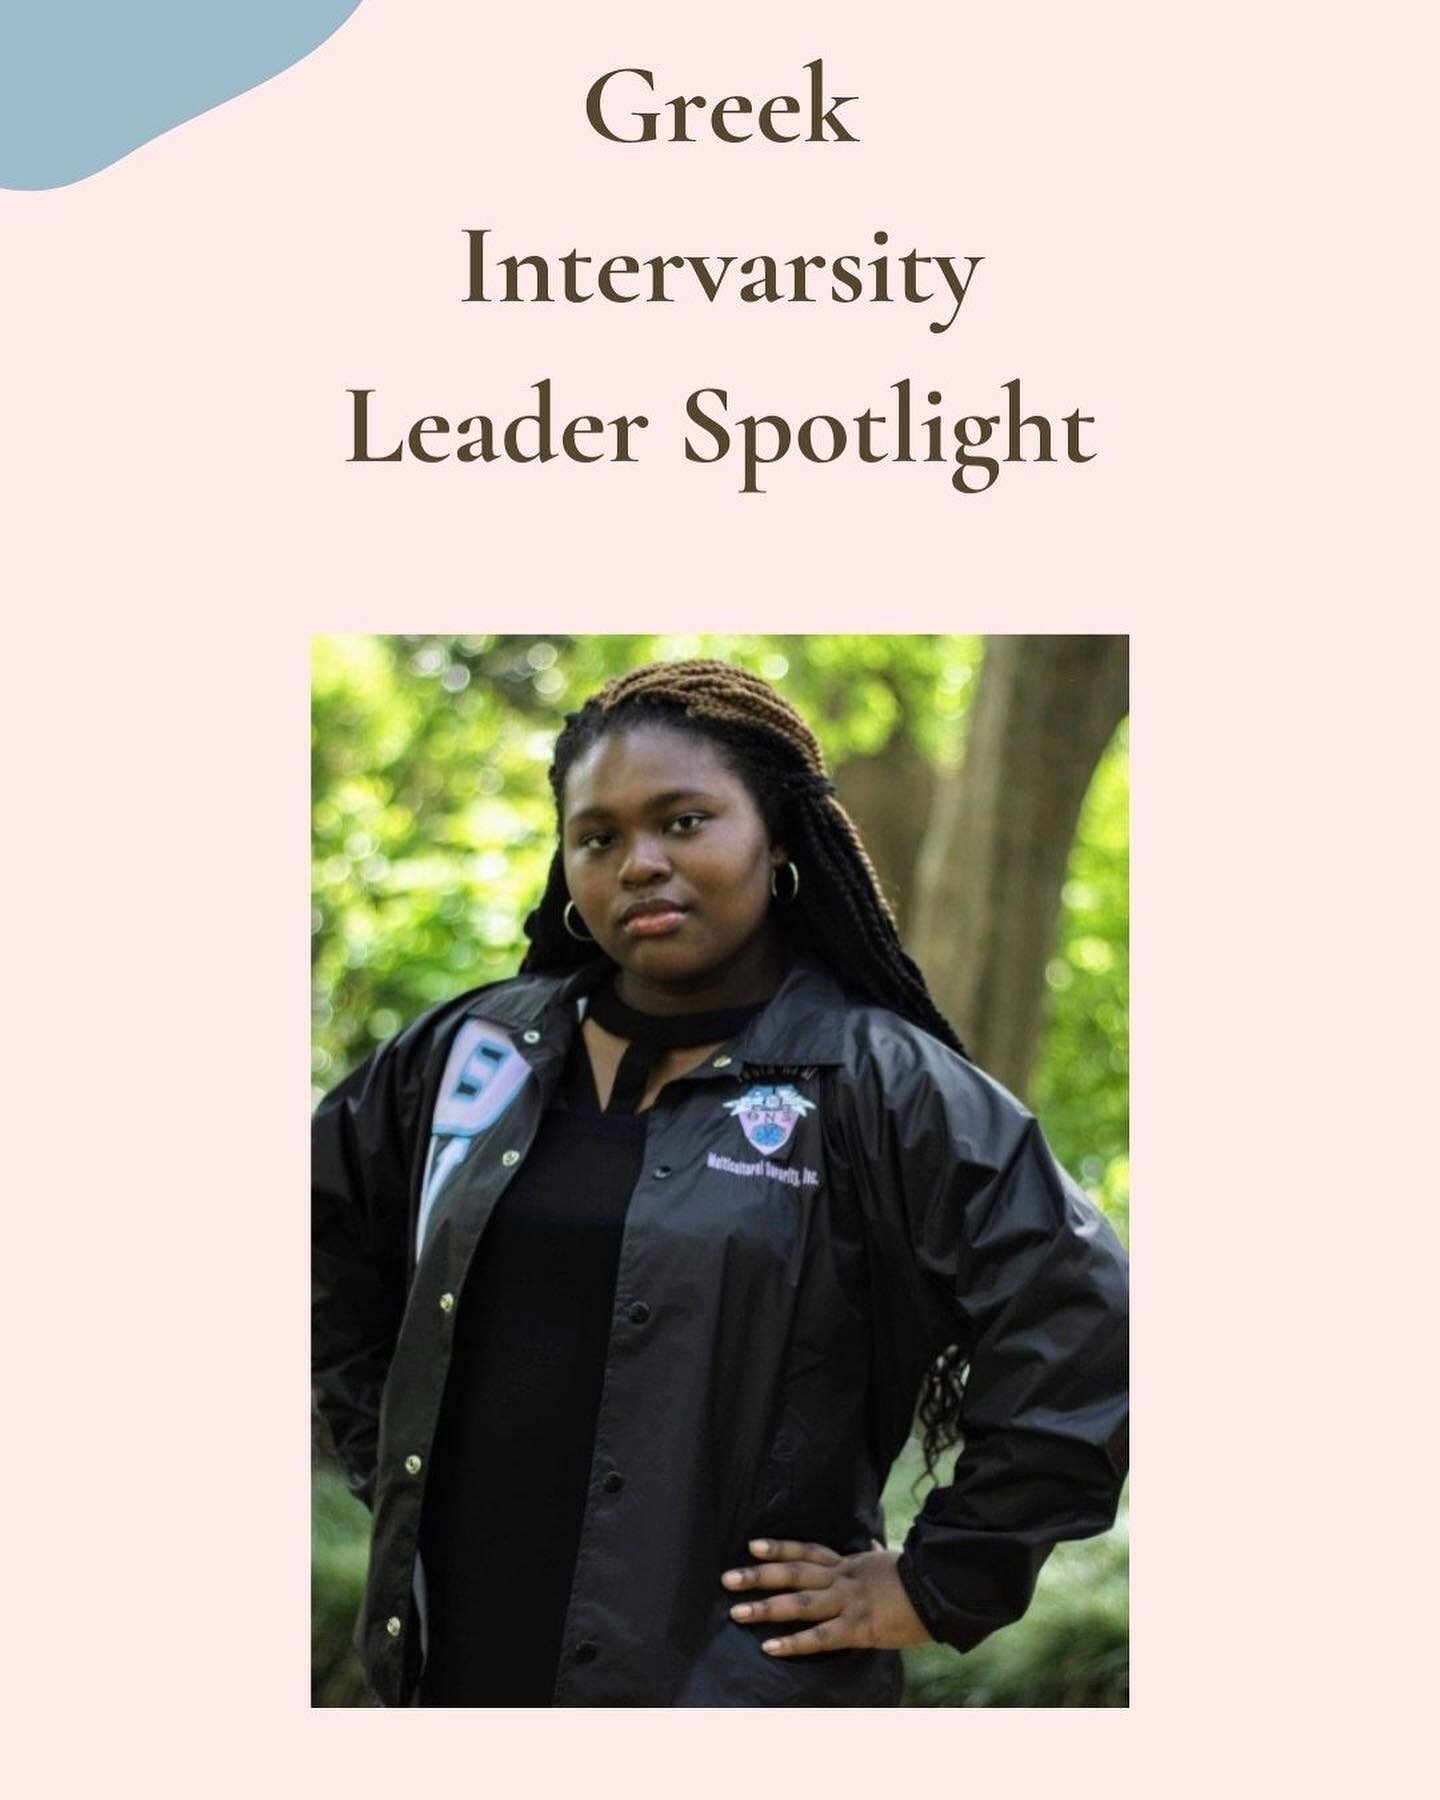 Day three of our leadership spotlight!!!

Meet Tamiya! she is a senior and a sister of Theta Nu Xi!  Fun fact: Tamiya has the brightest smile (even though you can&rsquo;t tell in this fierce photo)! She loves that Greek IV has allowed her to grow spi